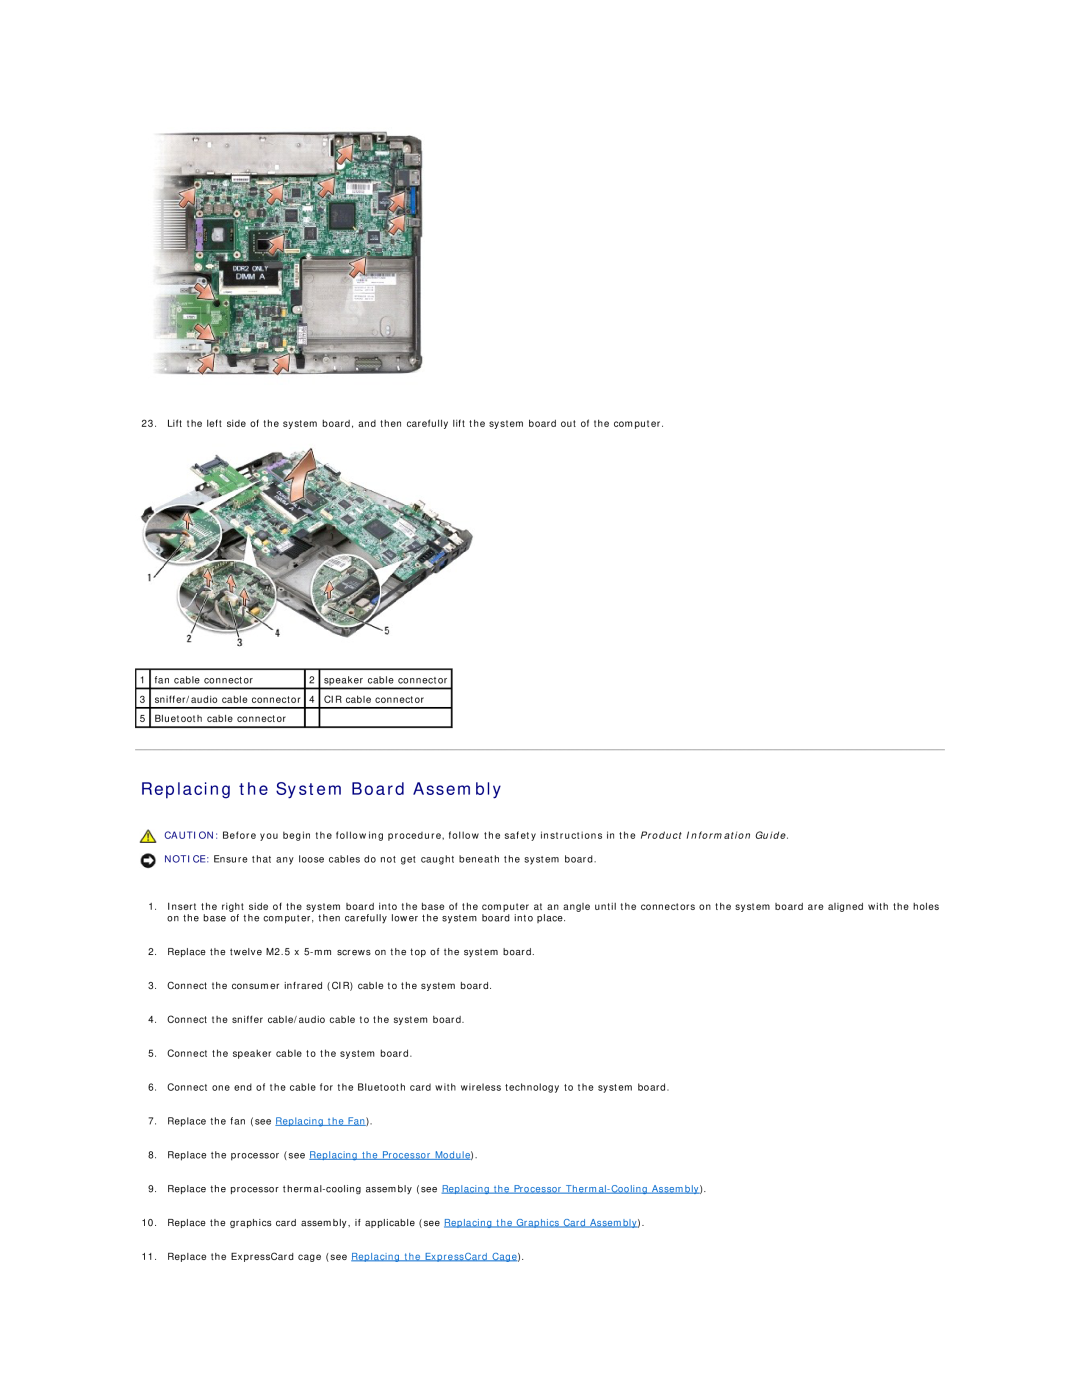 Dell 1500, 1521 manual Replacing the System Board Assembly, Replace the processor see Replacing the Processor Module 